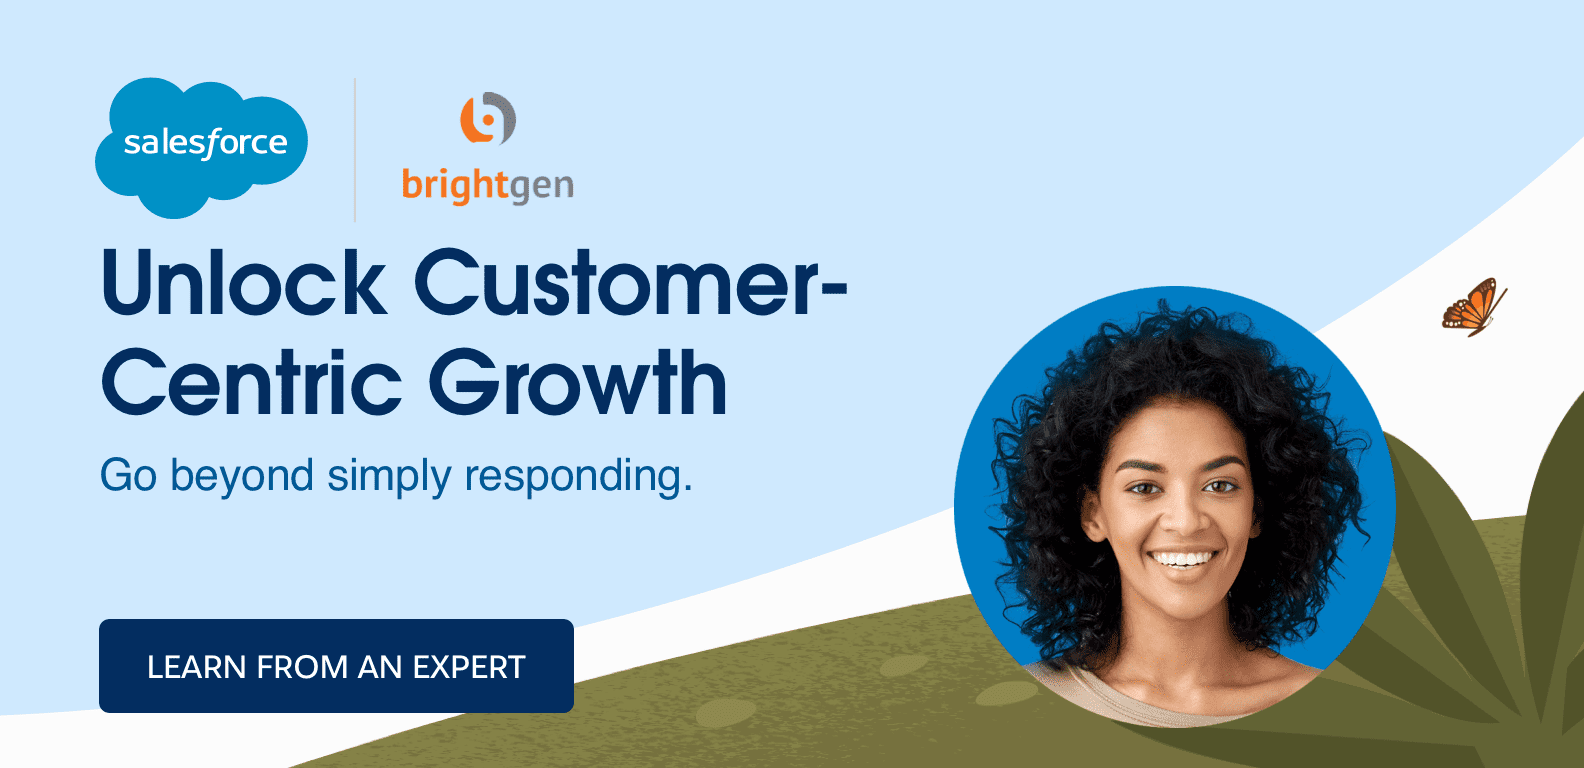 Unlock customer-centric growth with Salesforce and BrightGen